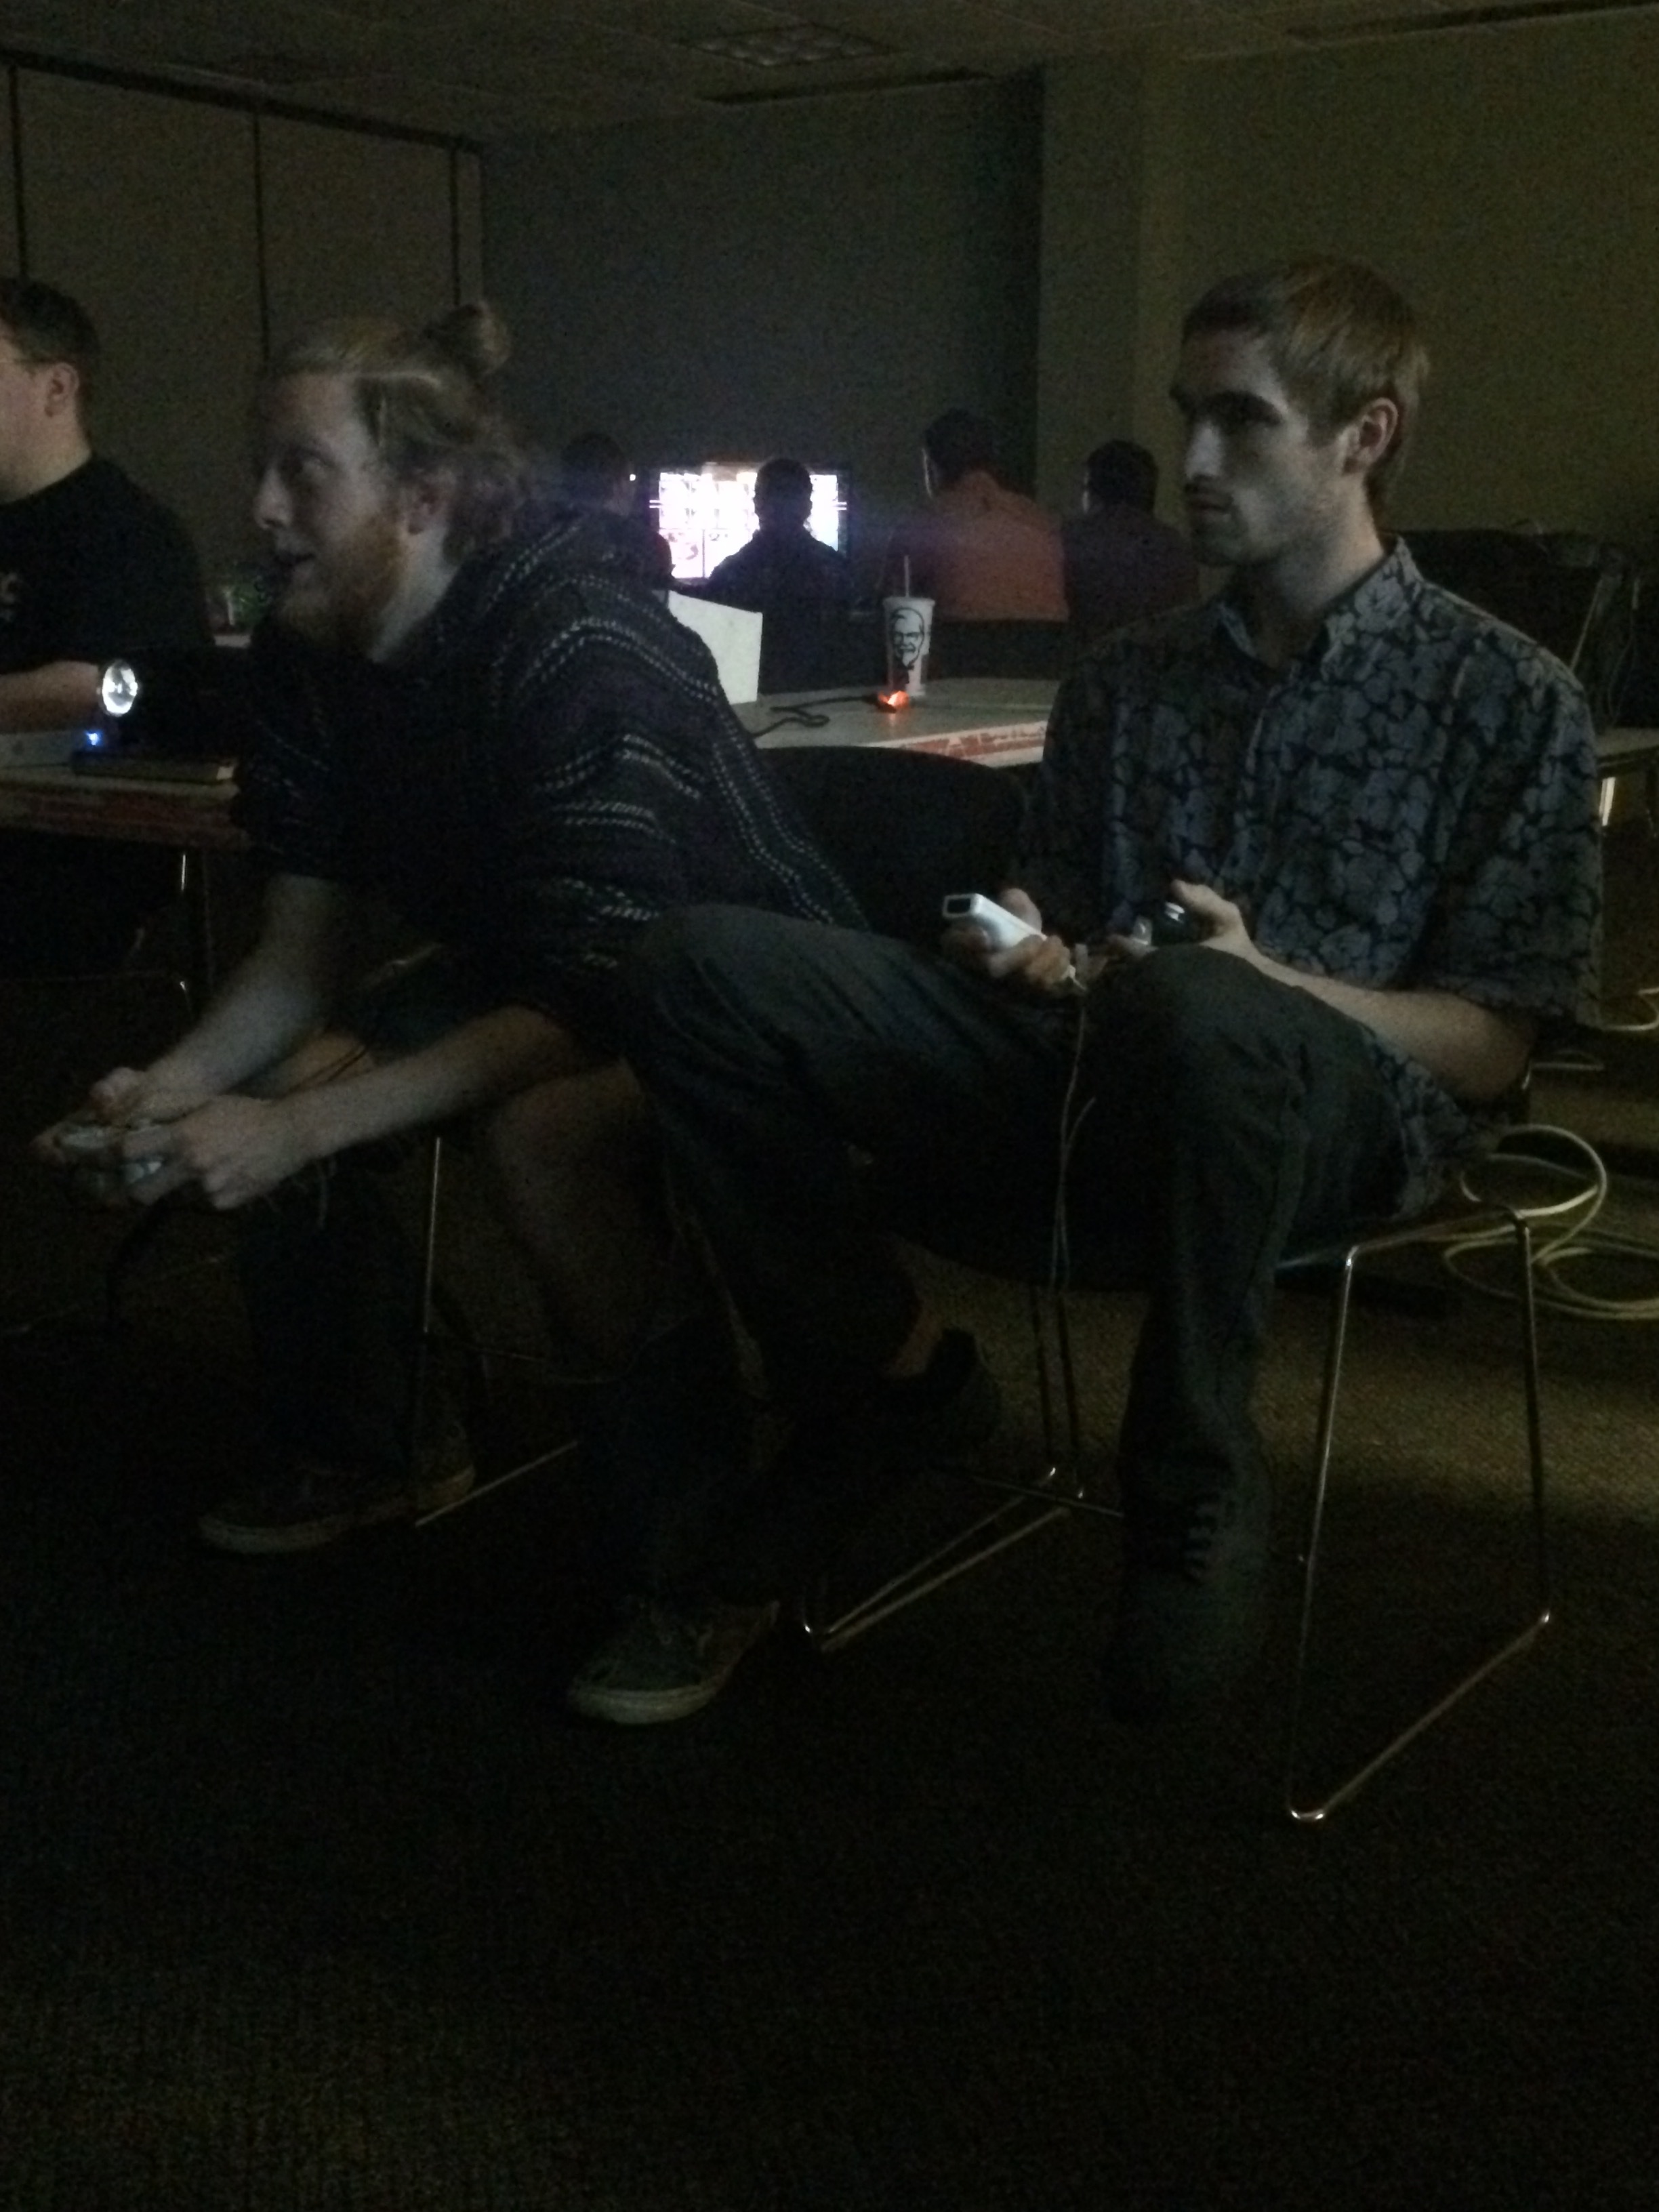  Samuel Helms and Michael Miller battle it out in an intense game of "Smash Bros Brawl." 